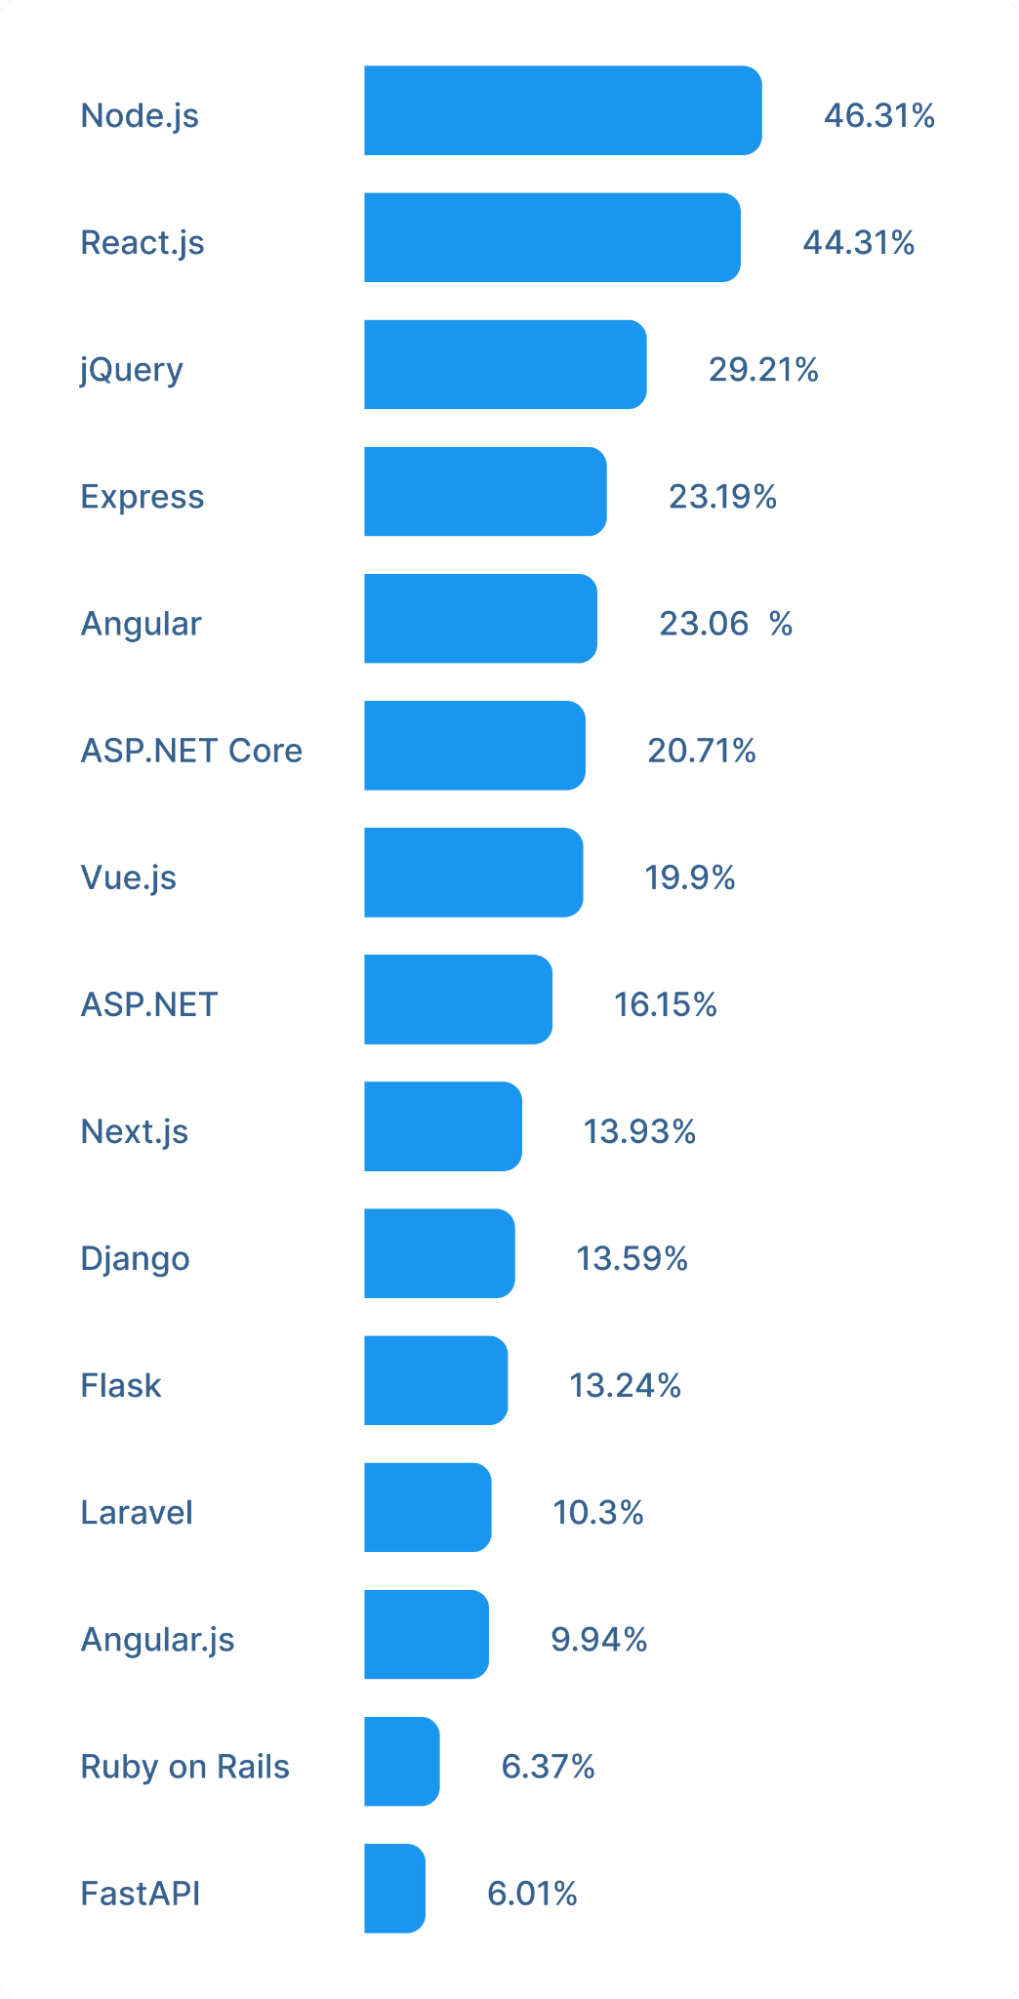 Web frameworks and technologies that are most used currently include Node.js, React.js, jQuery, Express, and Angular.